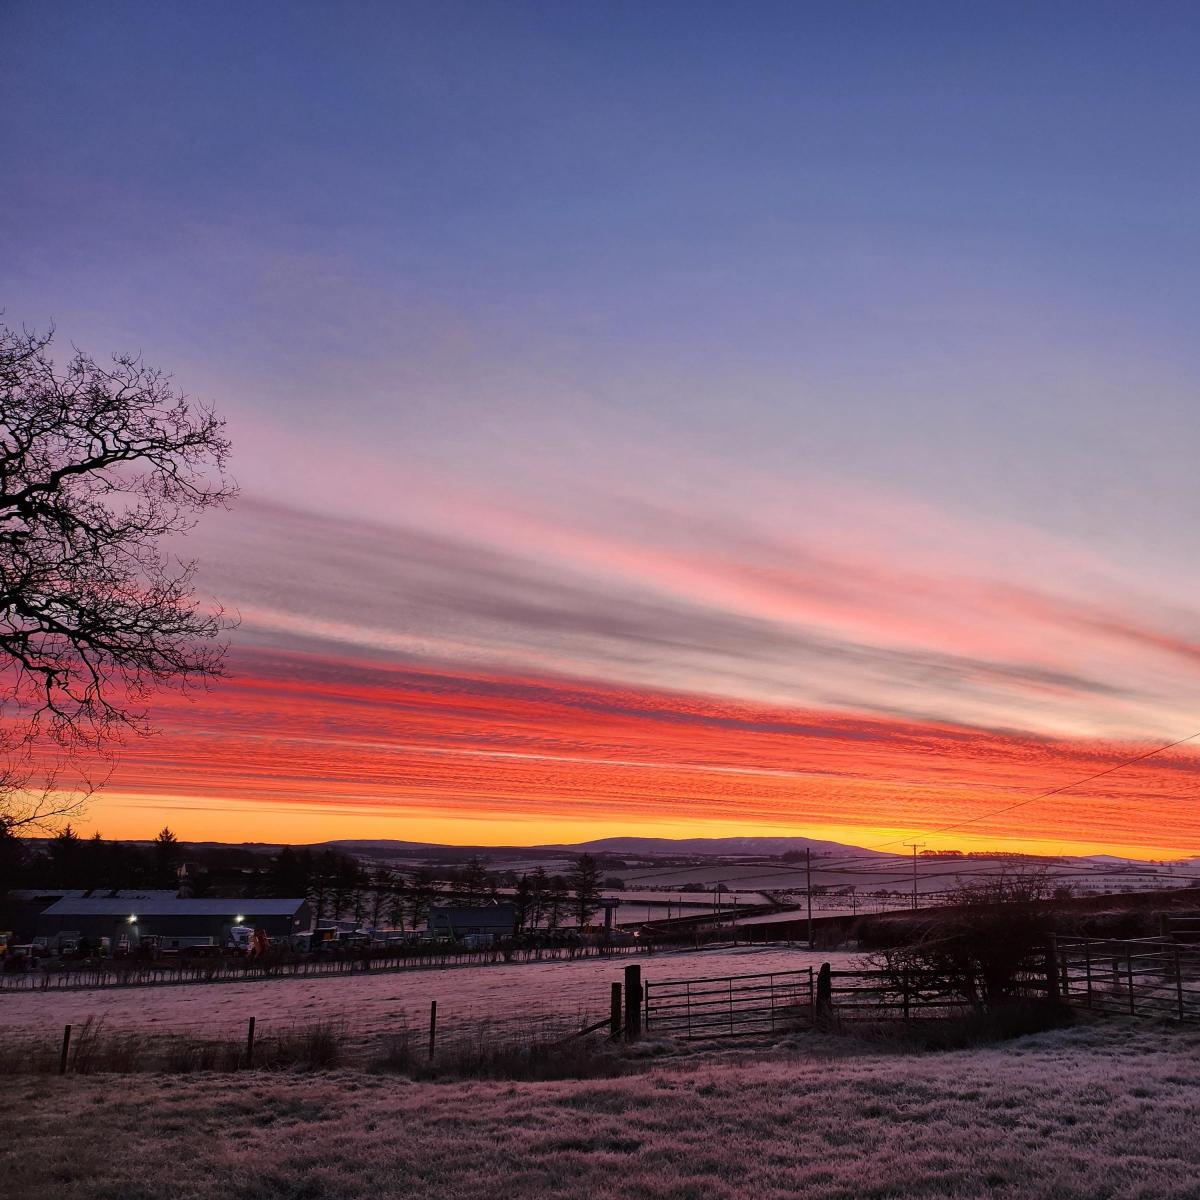 Katie Russell (Knowehead Farm) - Early morning sunrise in Mauchline East Ayrshire